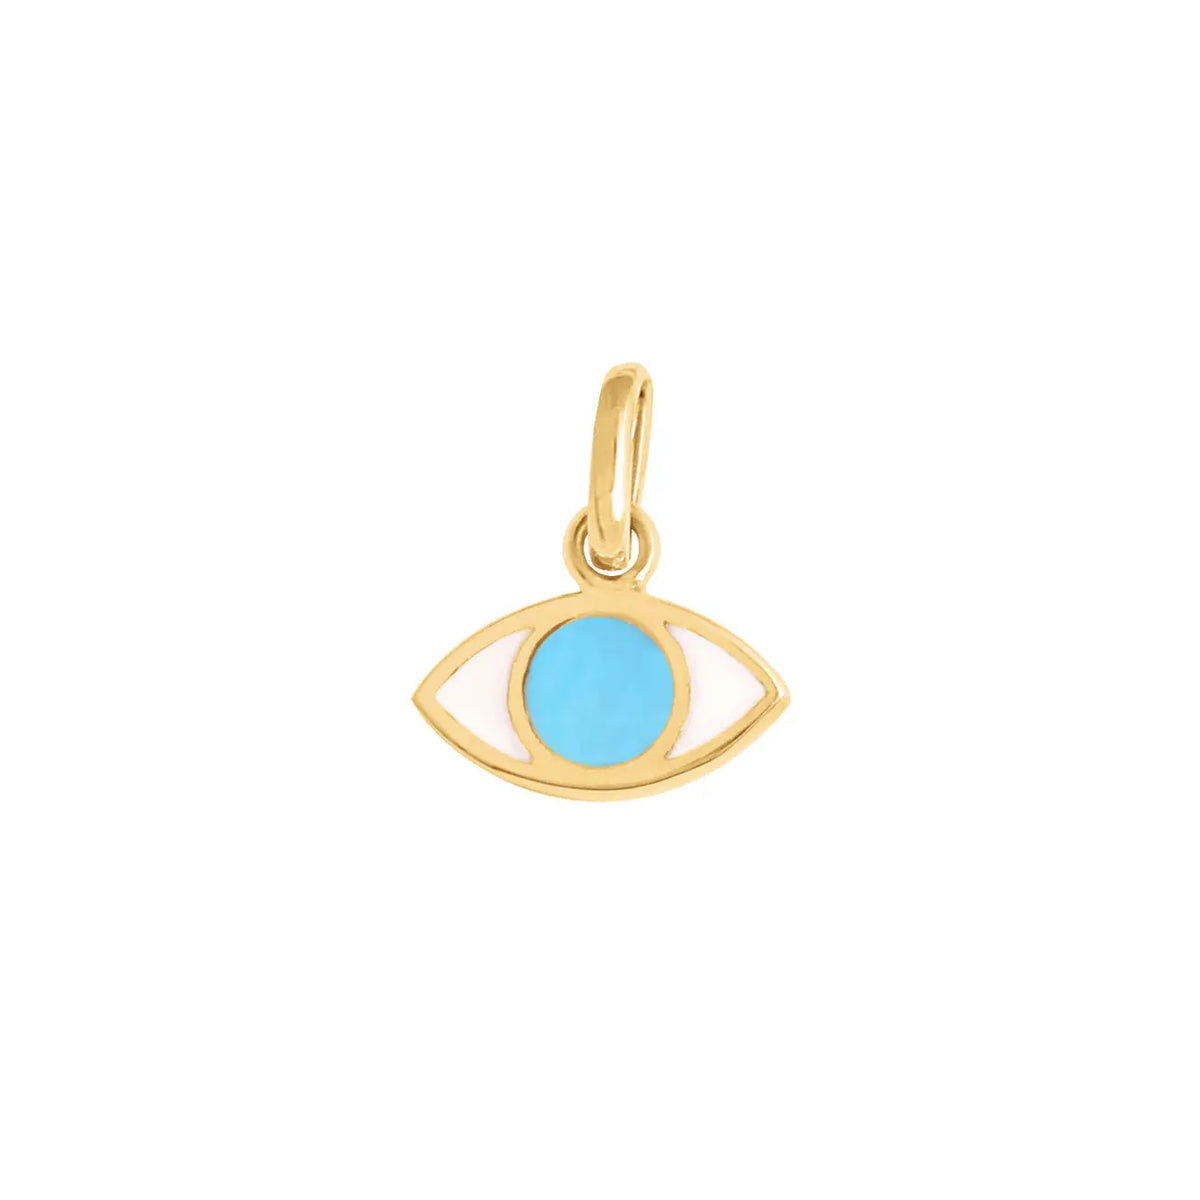 The Eye pendant by gigi CLOZEAU features signature 18 carat Yellow Gold, rich turquoise resin and a playful design for a sophisticated and modern appeal. Each jewel is unique, artisanally made in its family-owned workshop. The pendant measures 0.2&quot; (with bail 0.4&quot;), pendant sold without chain.